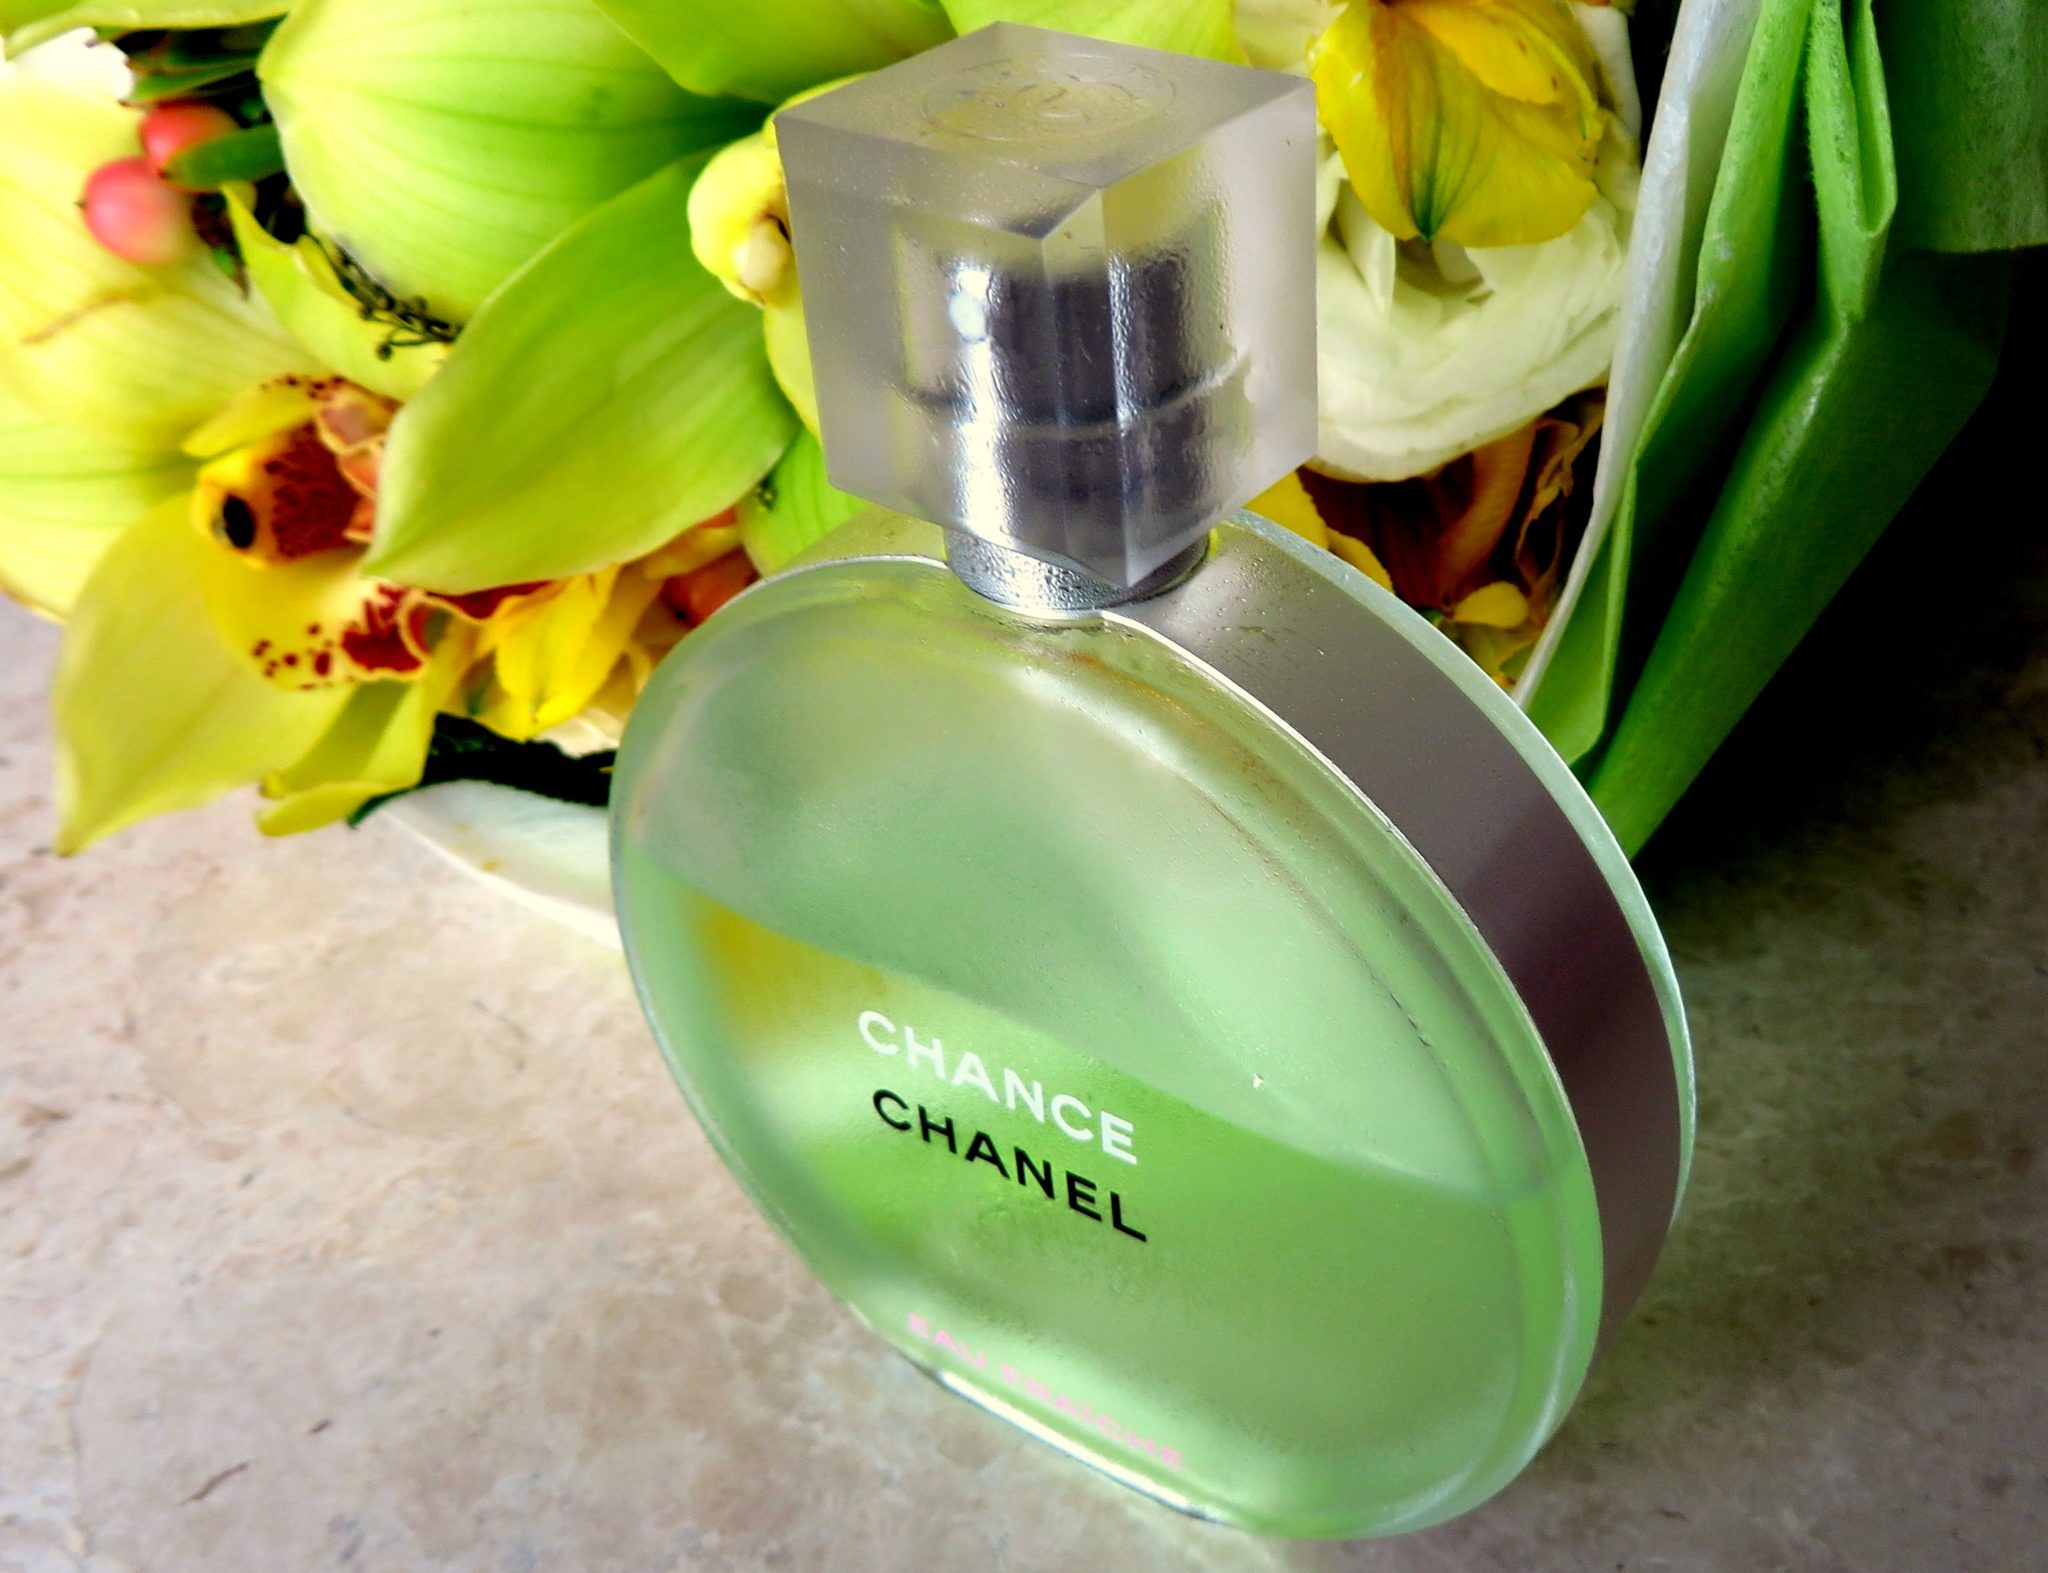 Chance Eau Fraiche EDT Review – Vanitynoapologies | and Beauty